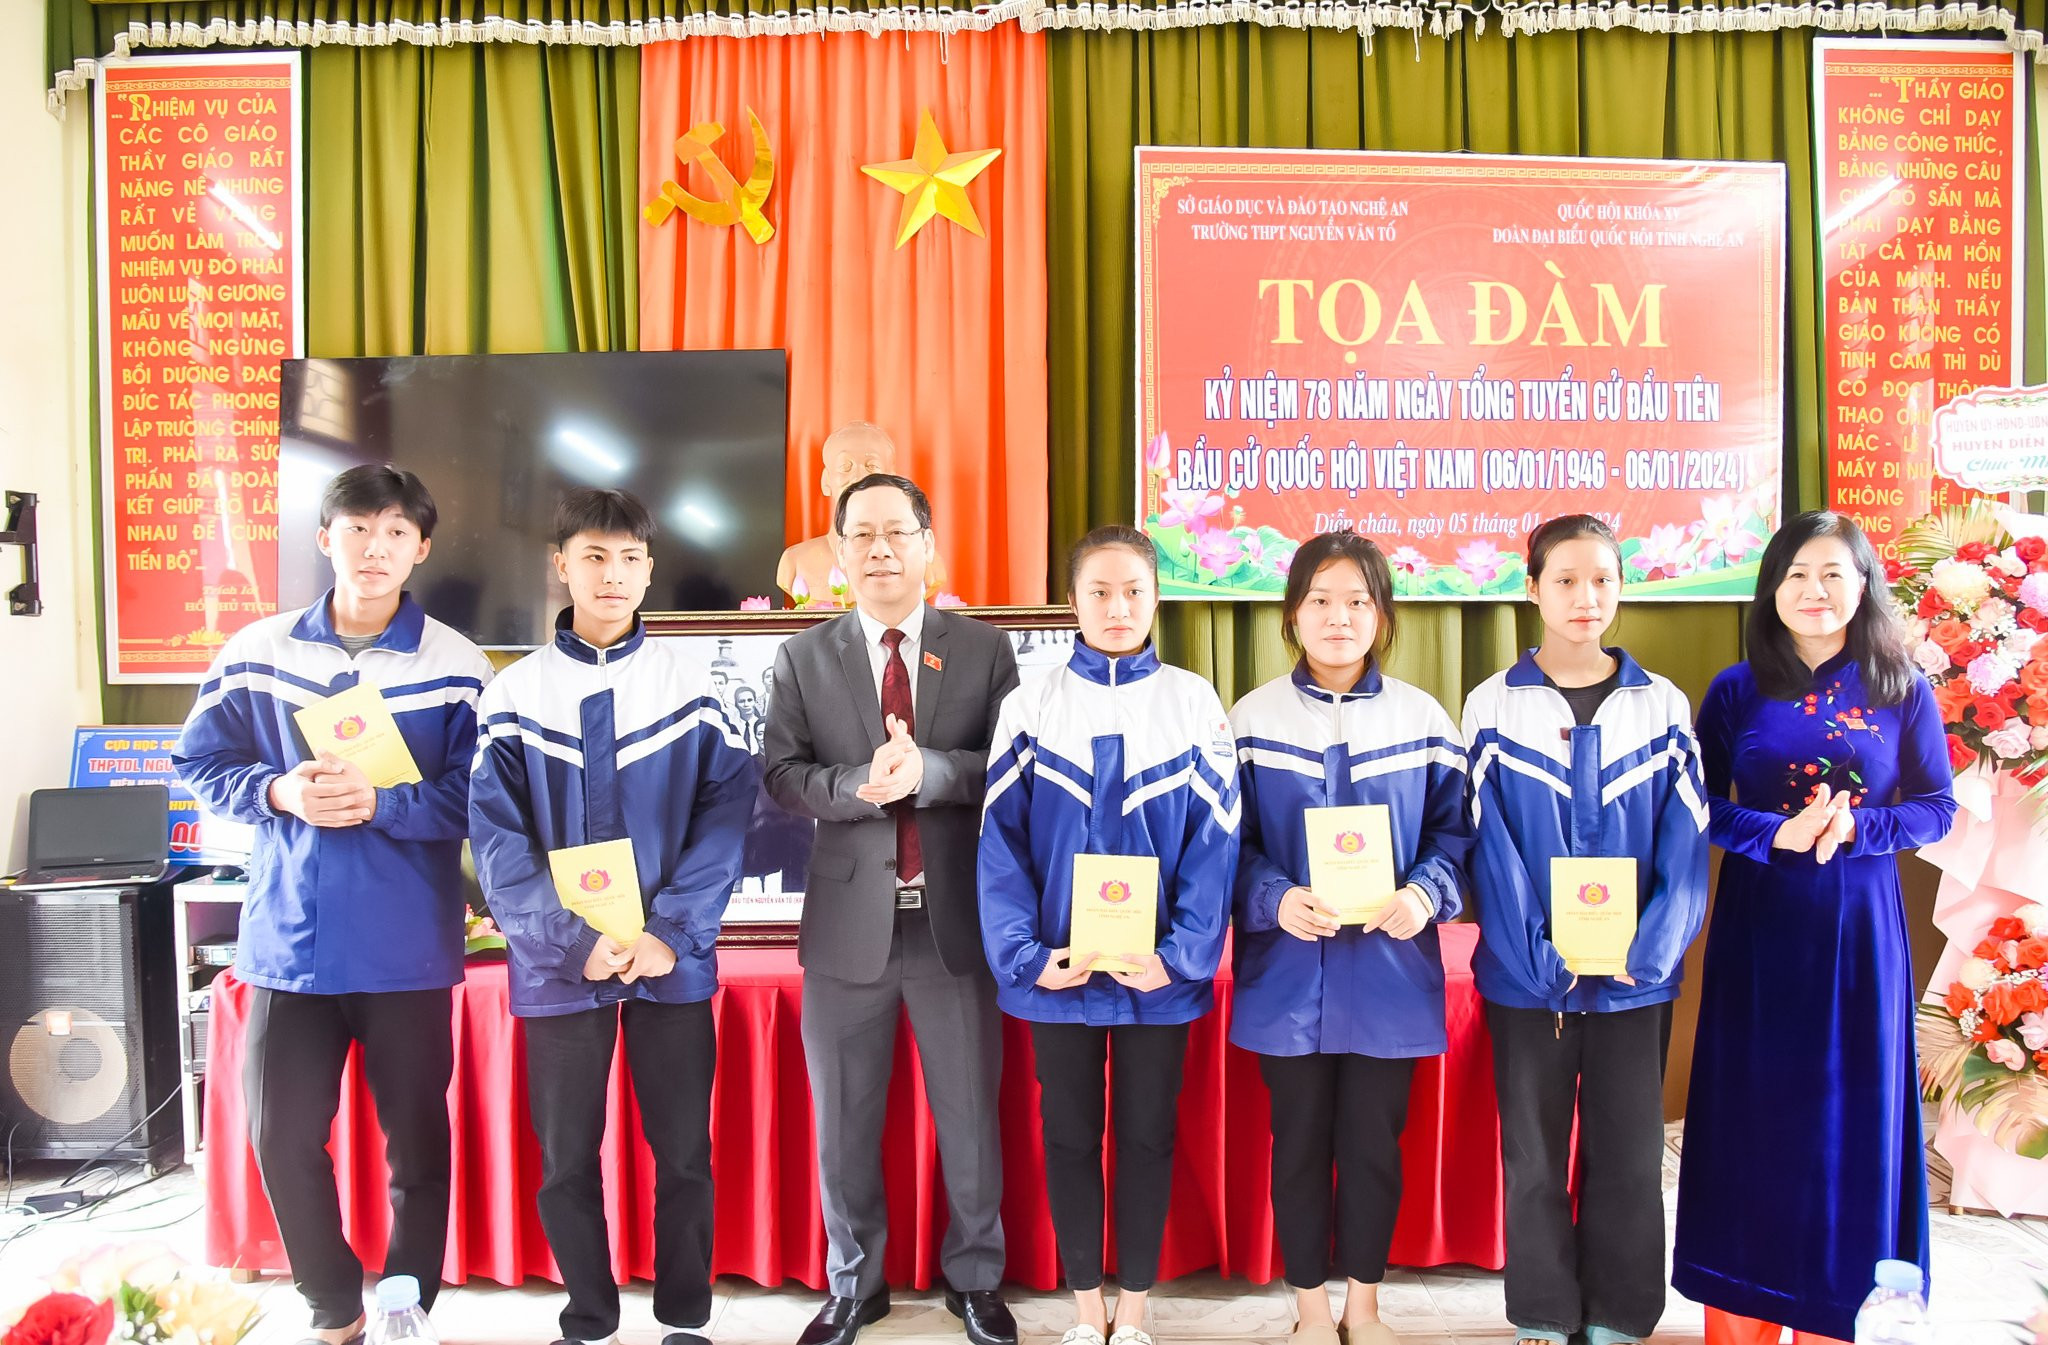 bna-trao-2-anh-thanh-le-2847.jpg